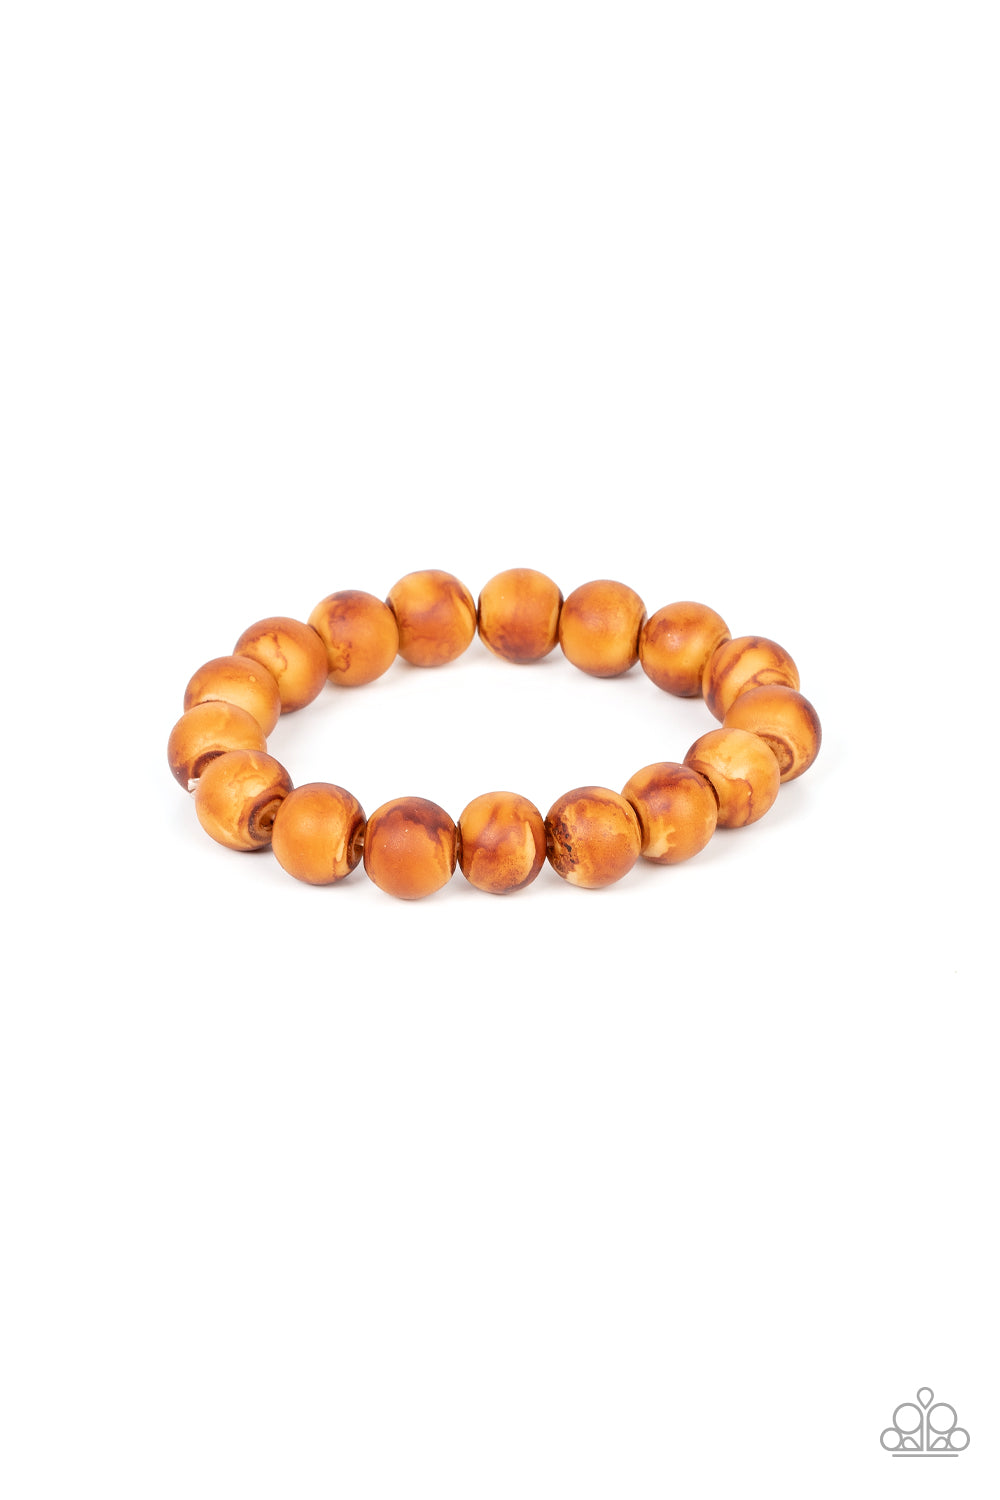 Totally Timber Mill Brown Urban Bracelet - Paparazzi Accessories  Featuring a distressed finish, an earthy collection of natural-colored wood beads are threaded along a stretchy band around the wrist for a rustic flair.  Sold as one individual bracelet.